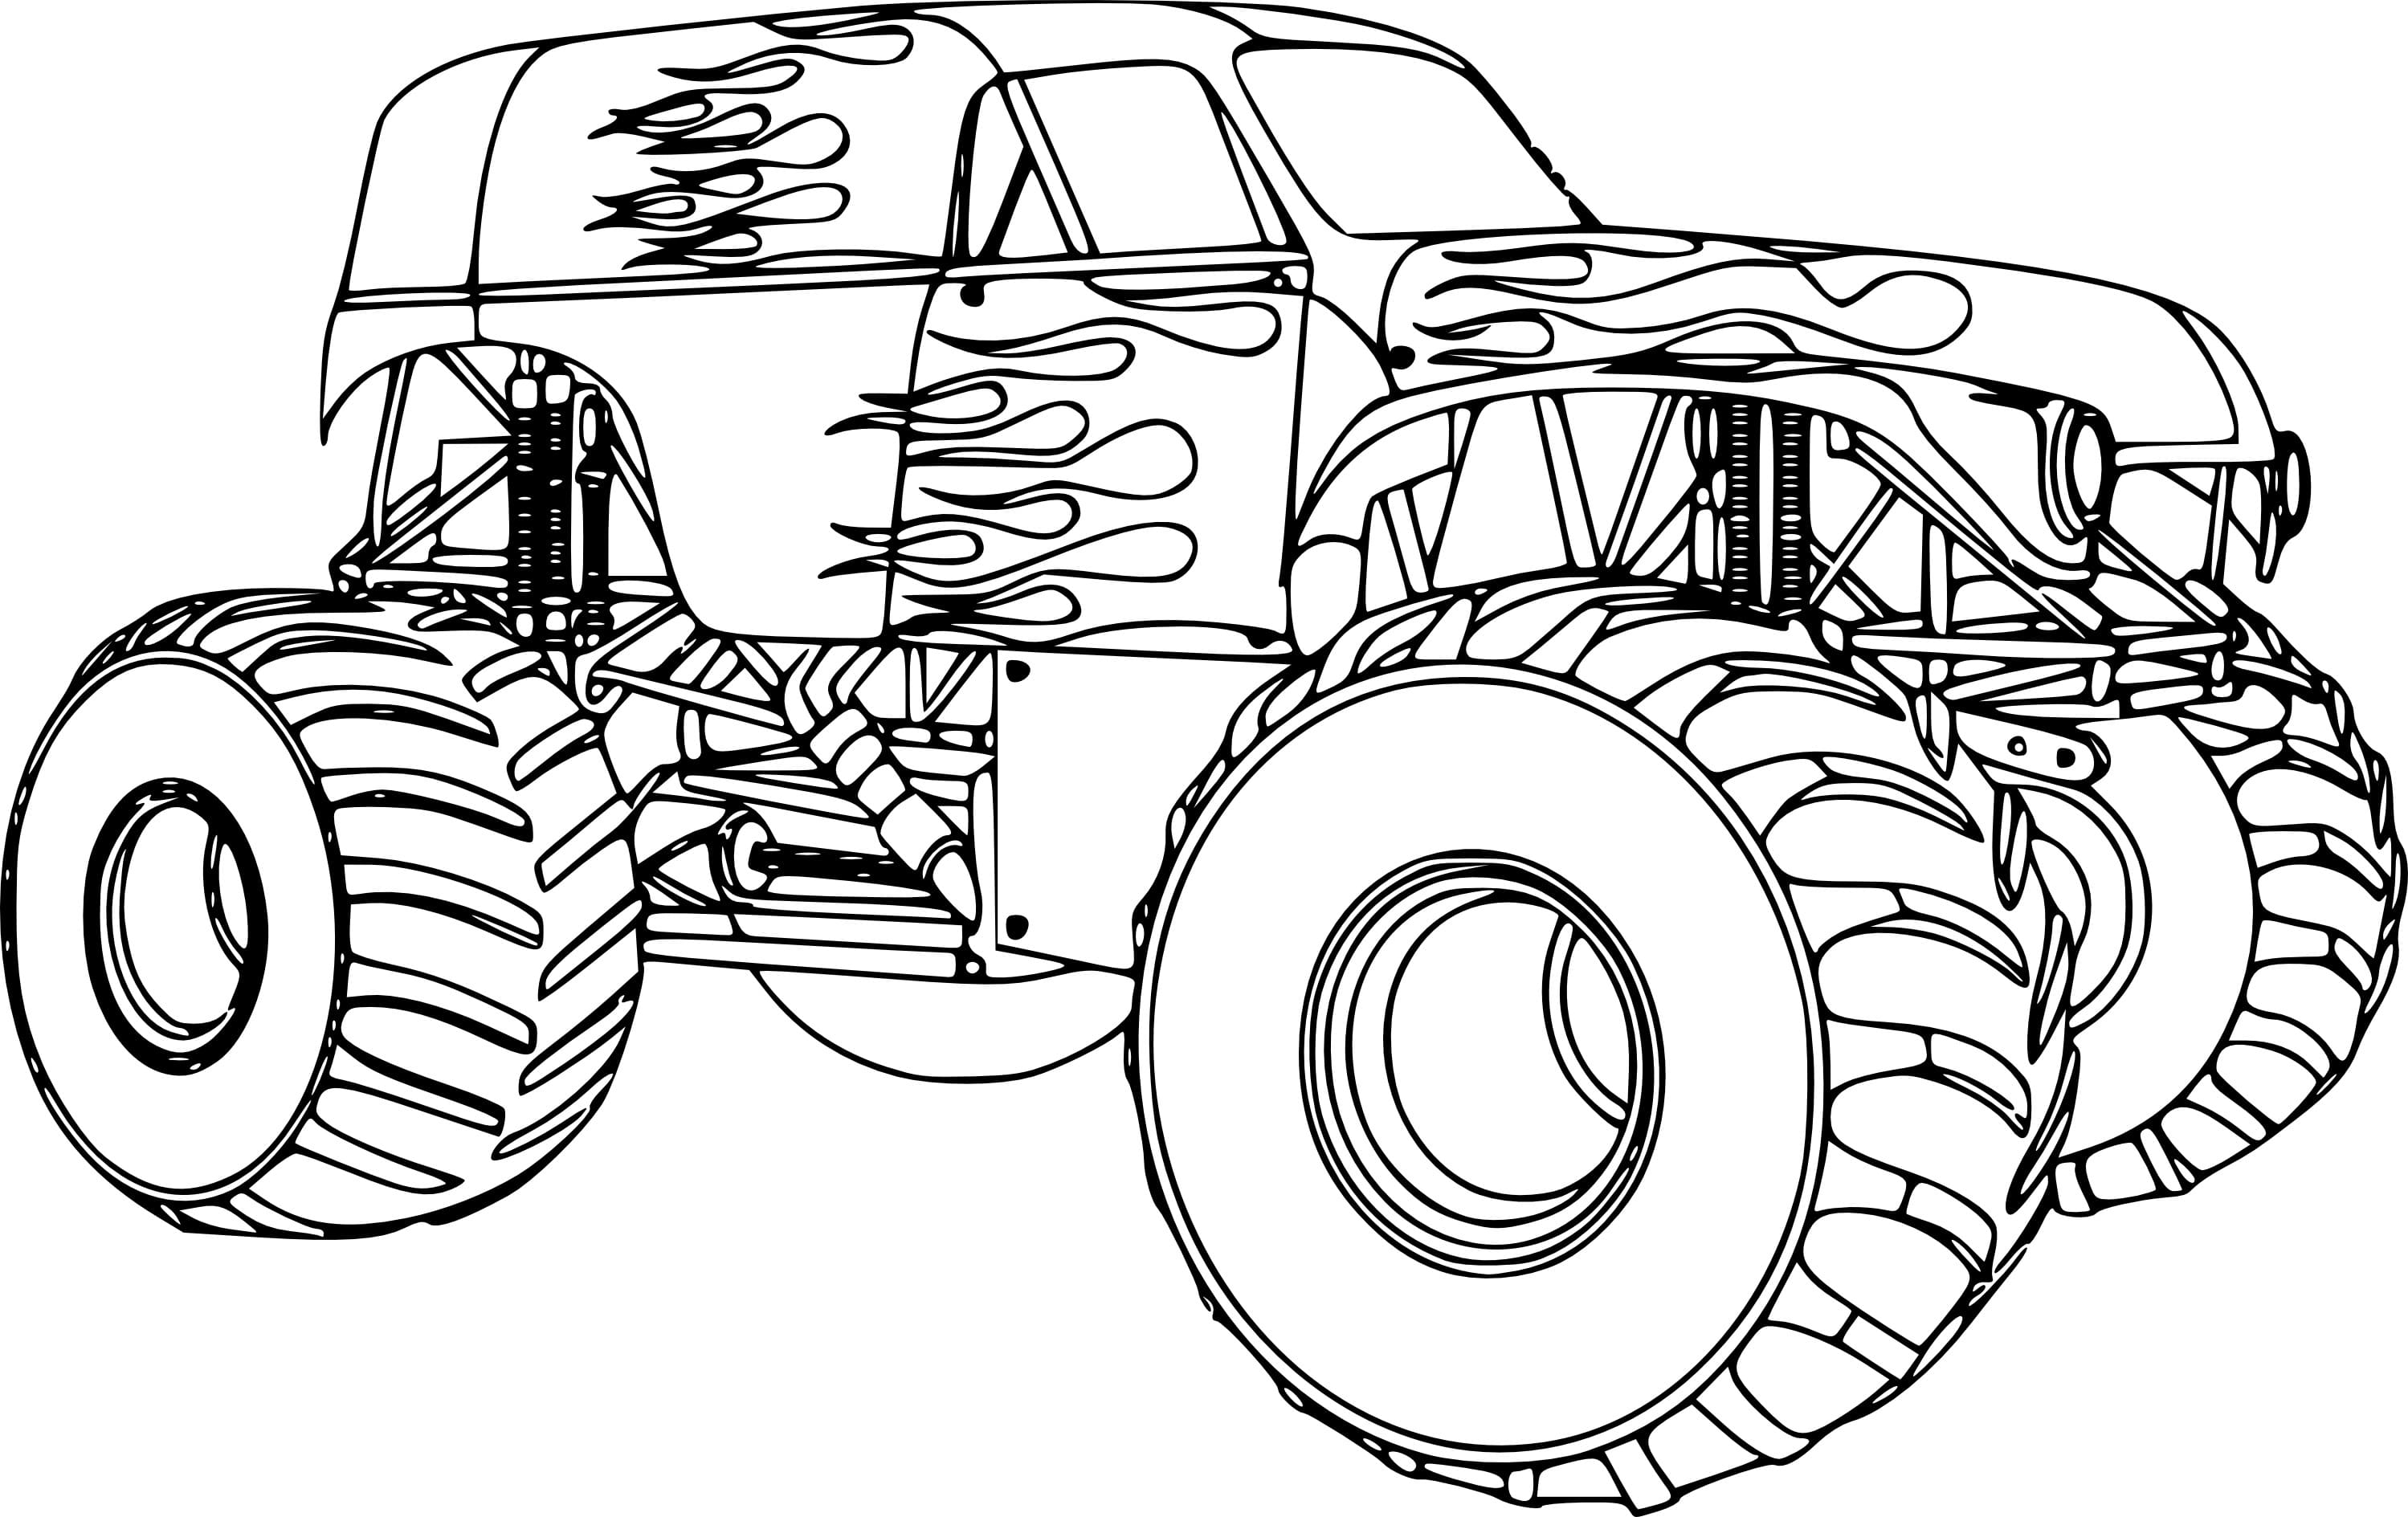 Download Hot Wheels coloring pages to download and print for free